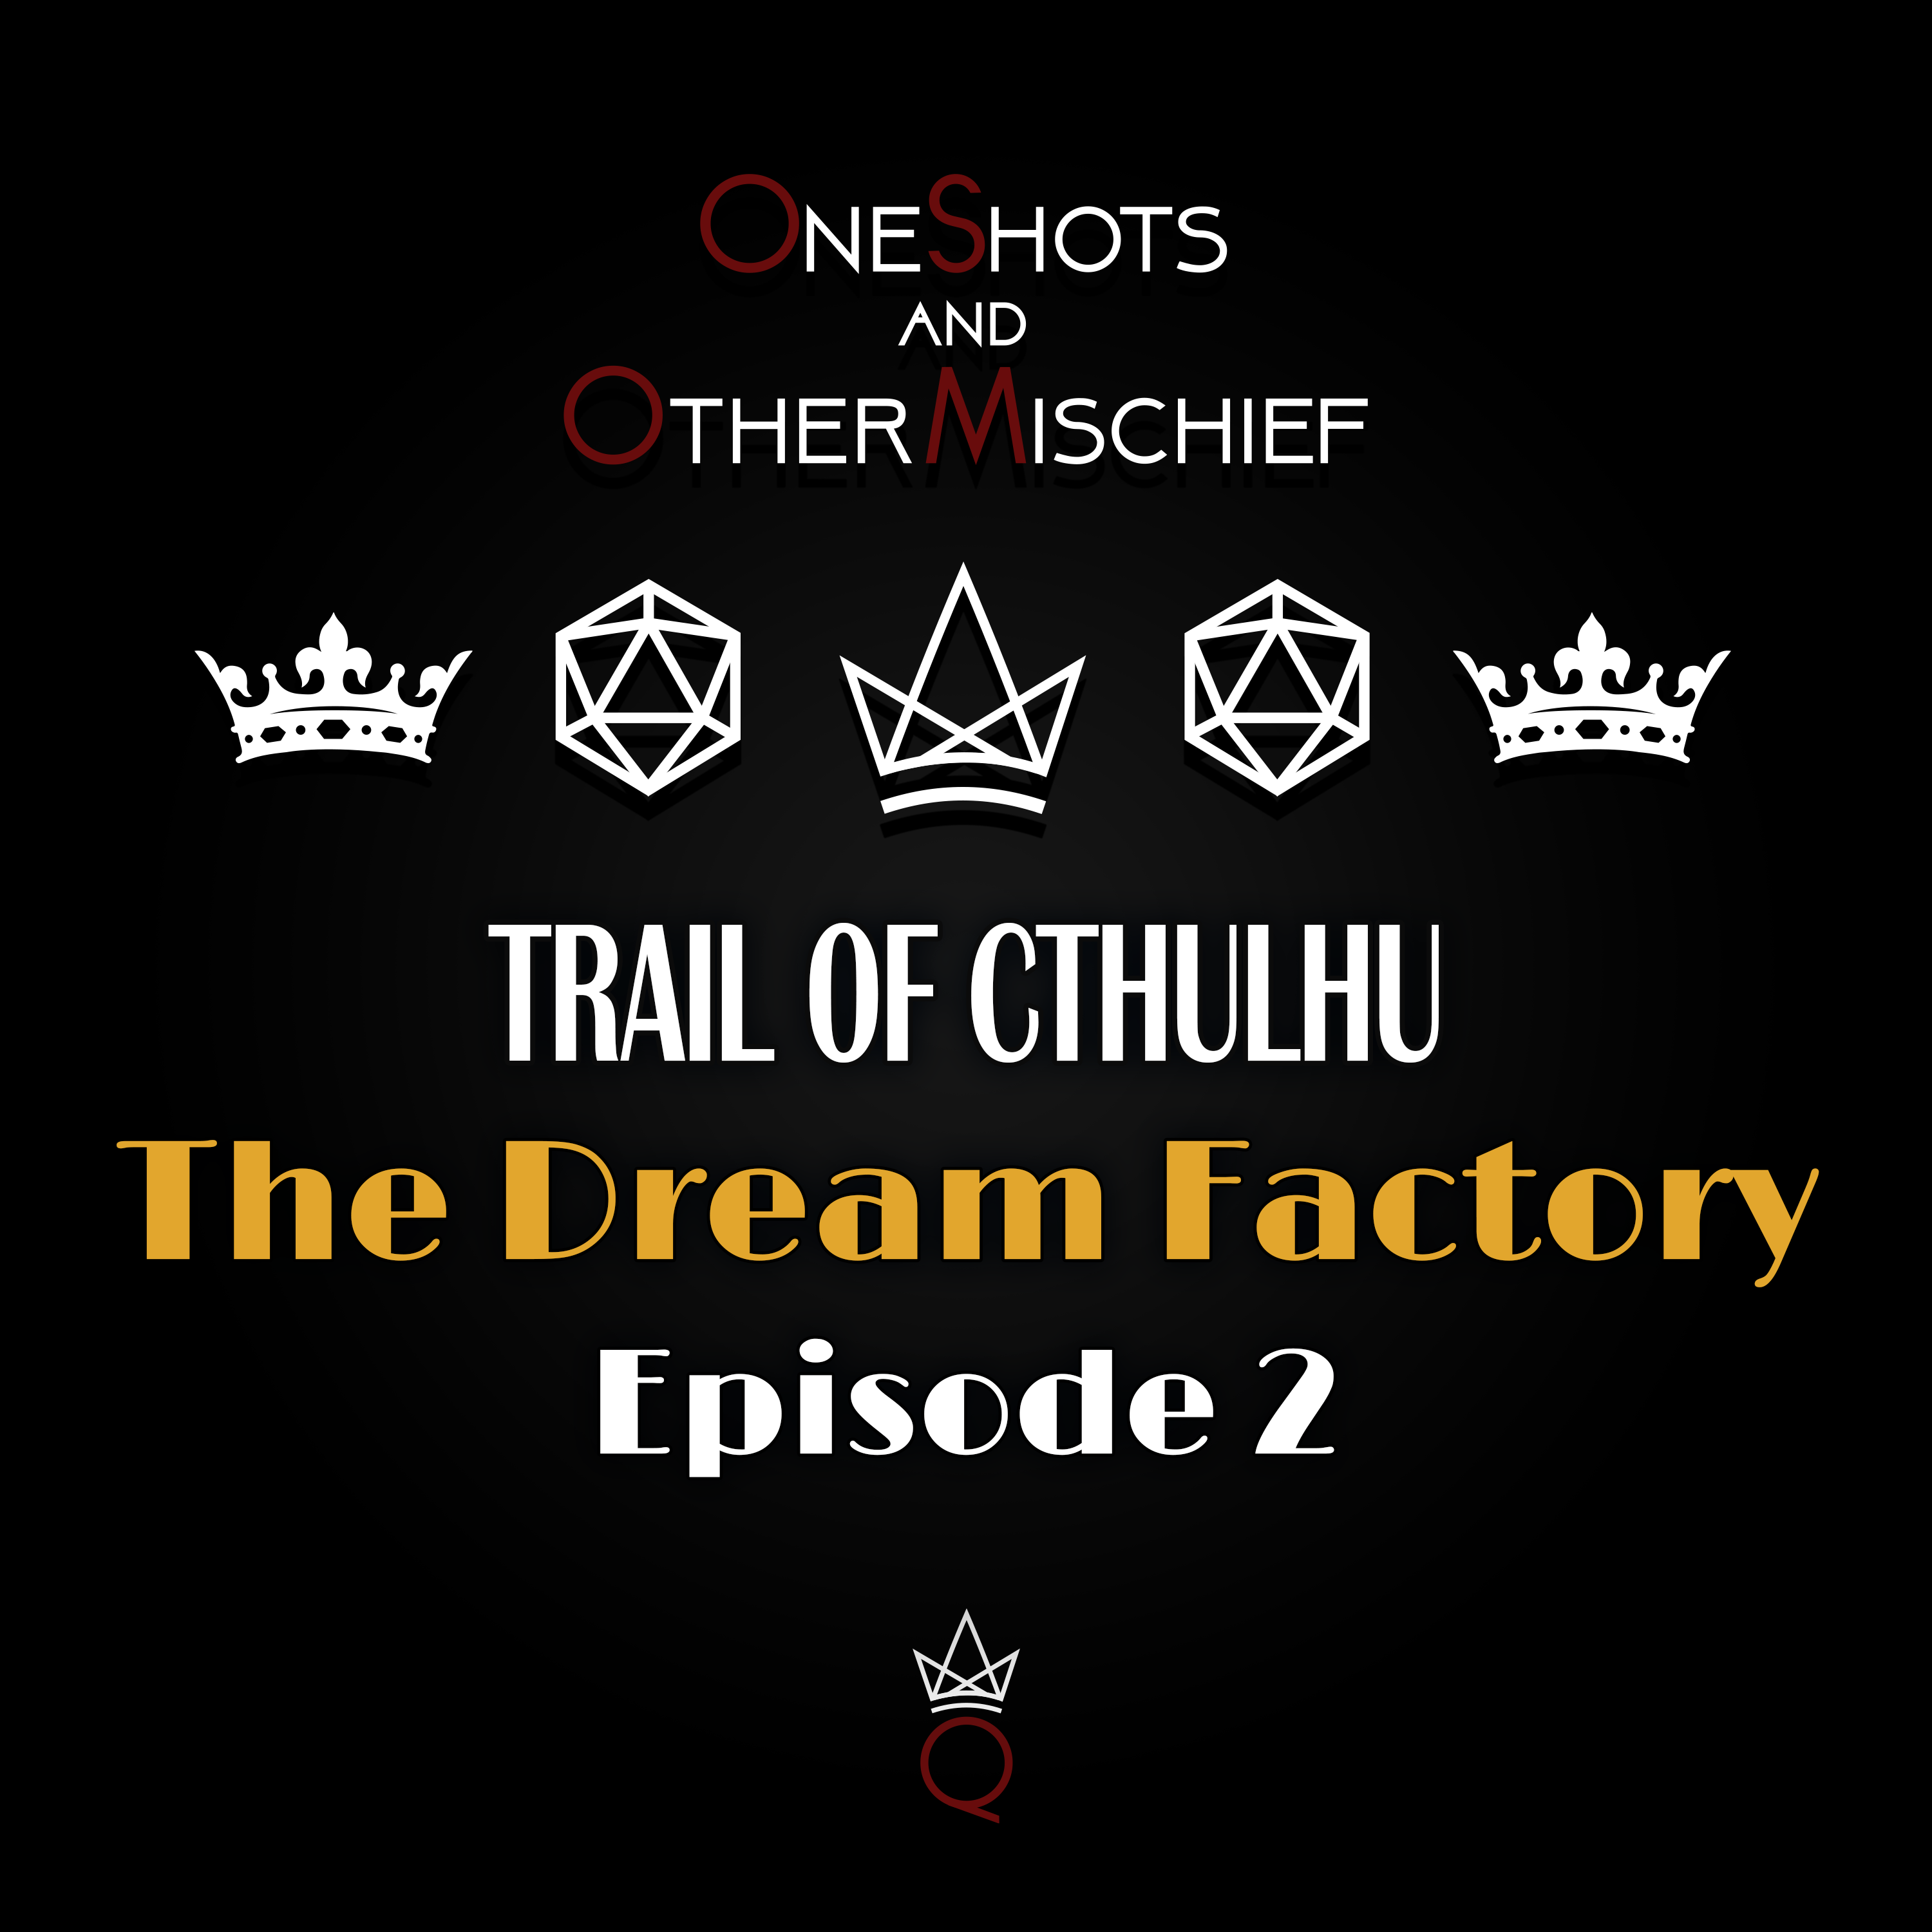 Trail of Cthulhu - The Dream Factory, Episode 2